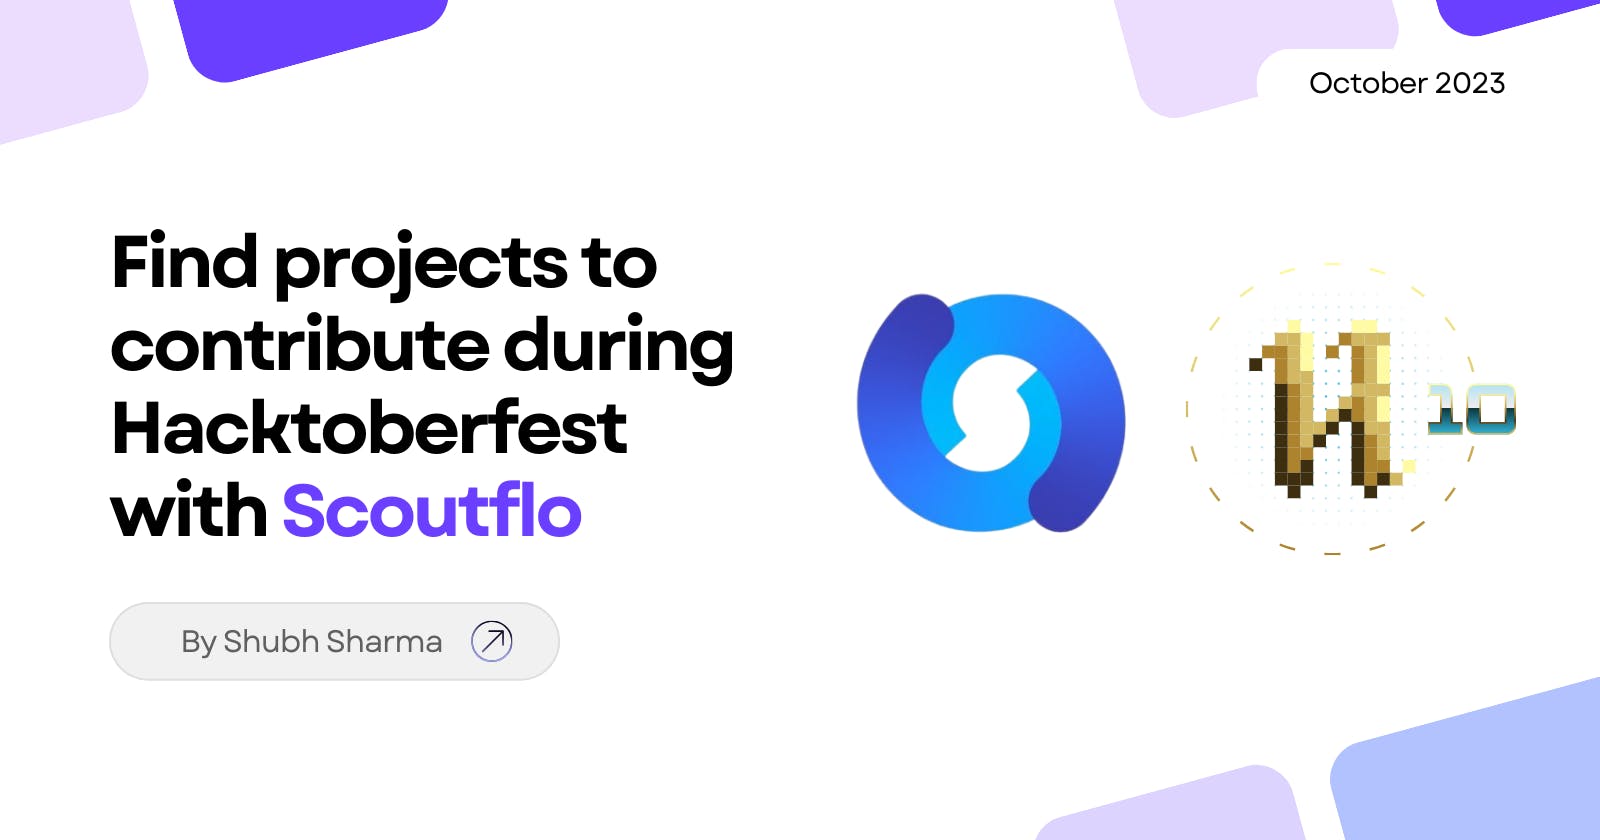 Discover Great Projects this Hacktoberfest with Scoutflo